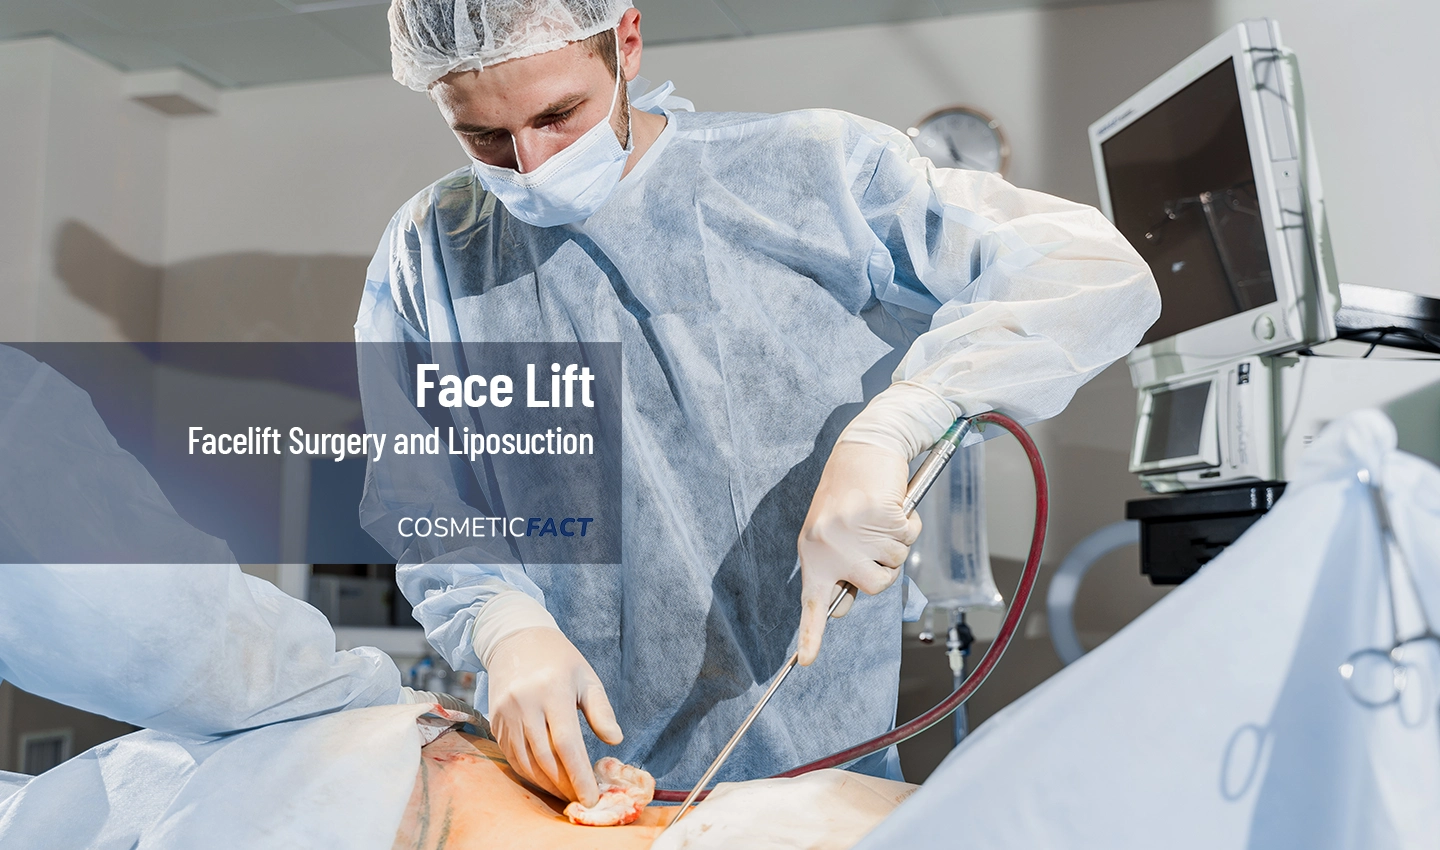 A plastic surgeon performing liposuction as part of a facelift surgery with liposuction combined procedure